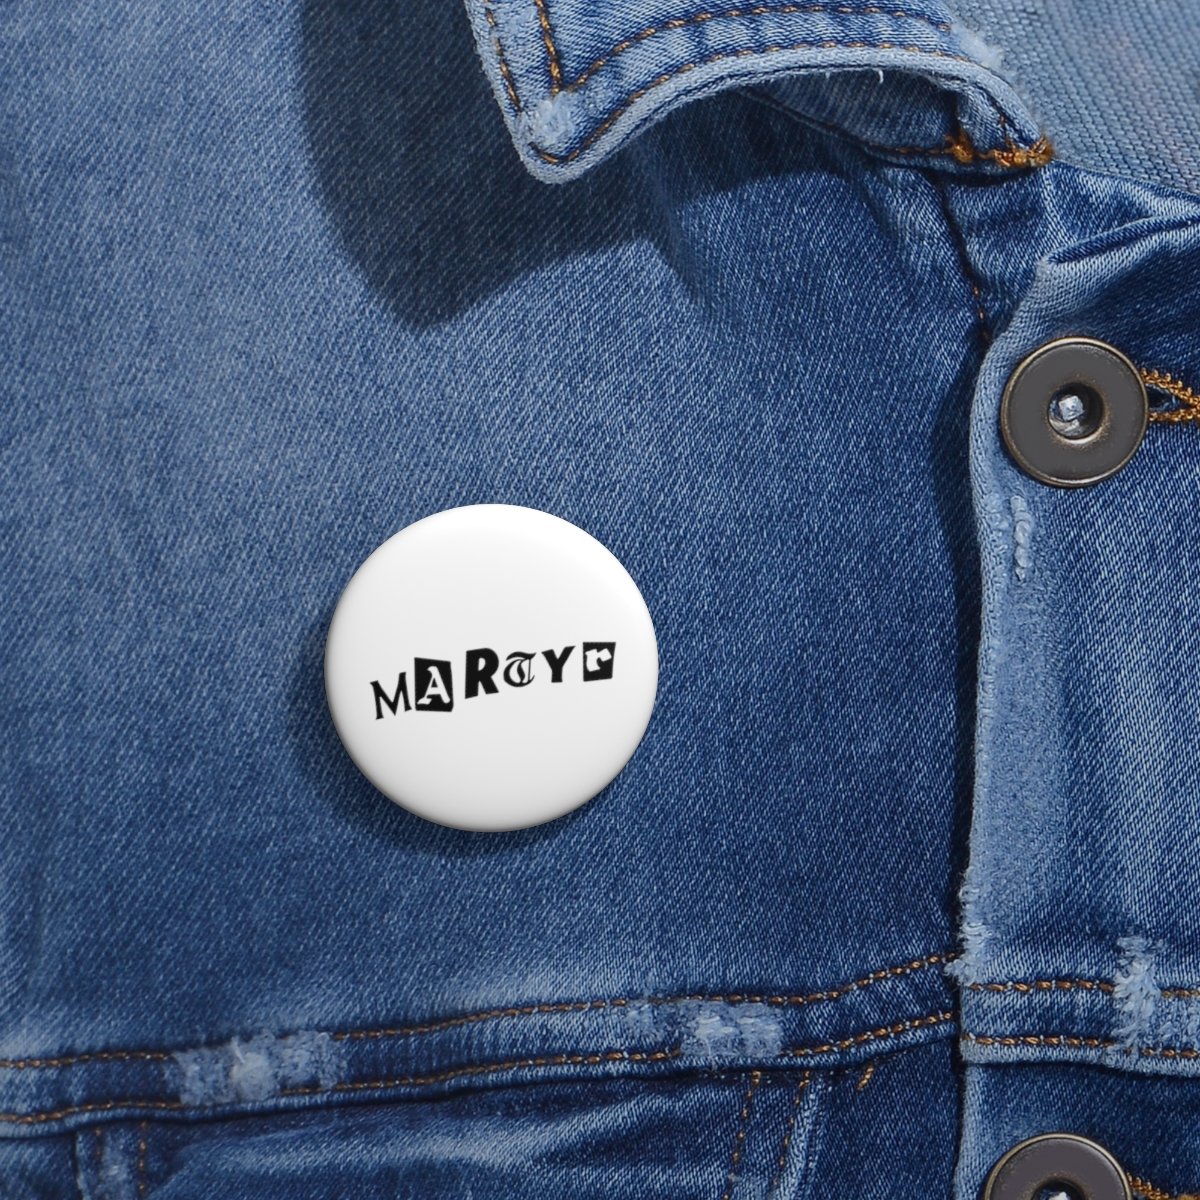 Martyr Ransom Logo (White) Pin Buttons